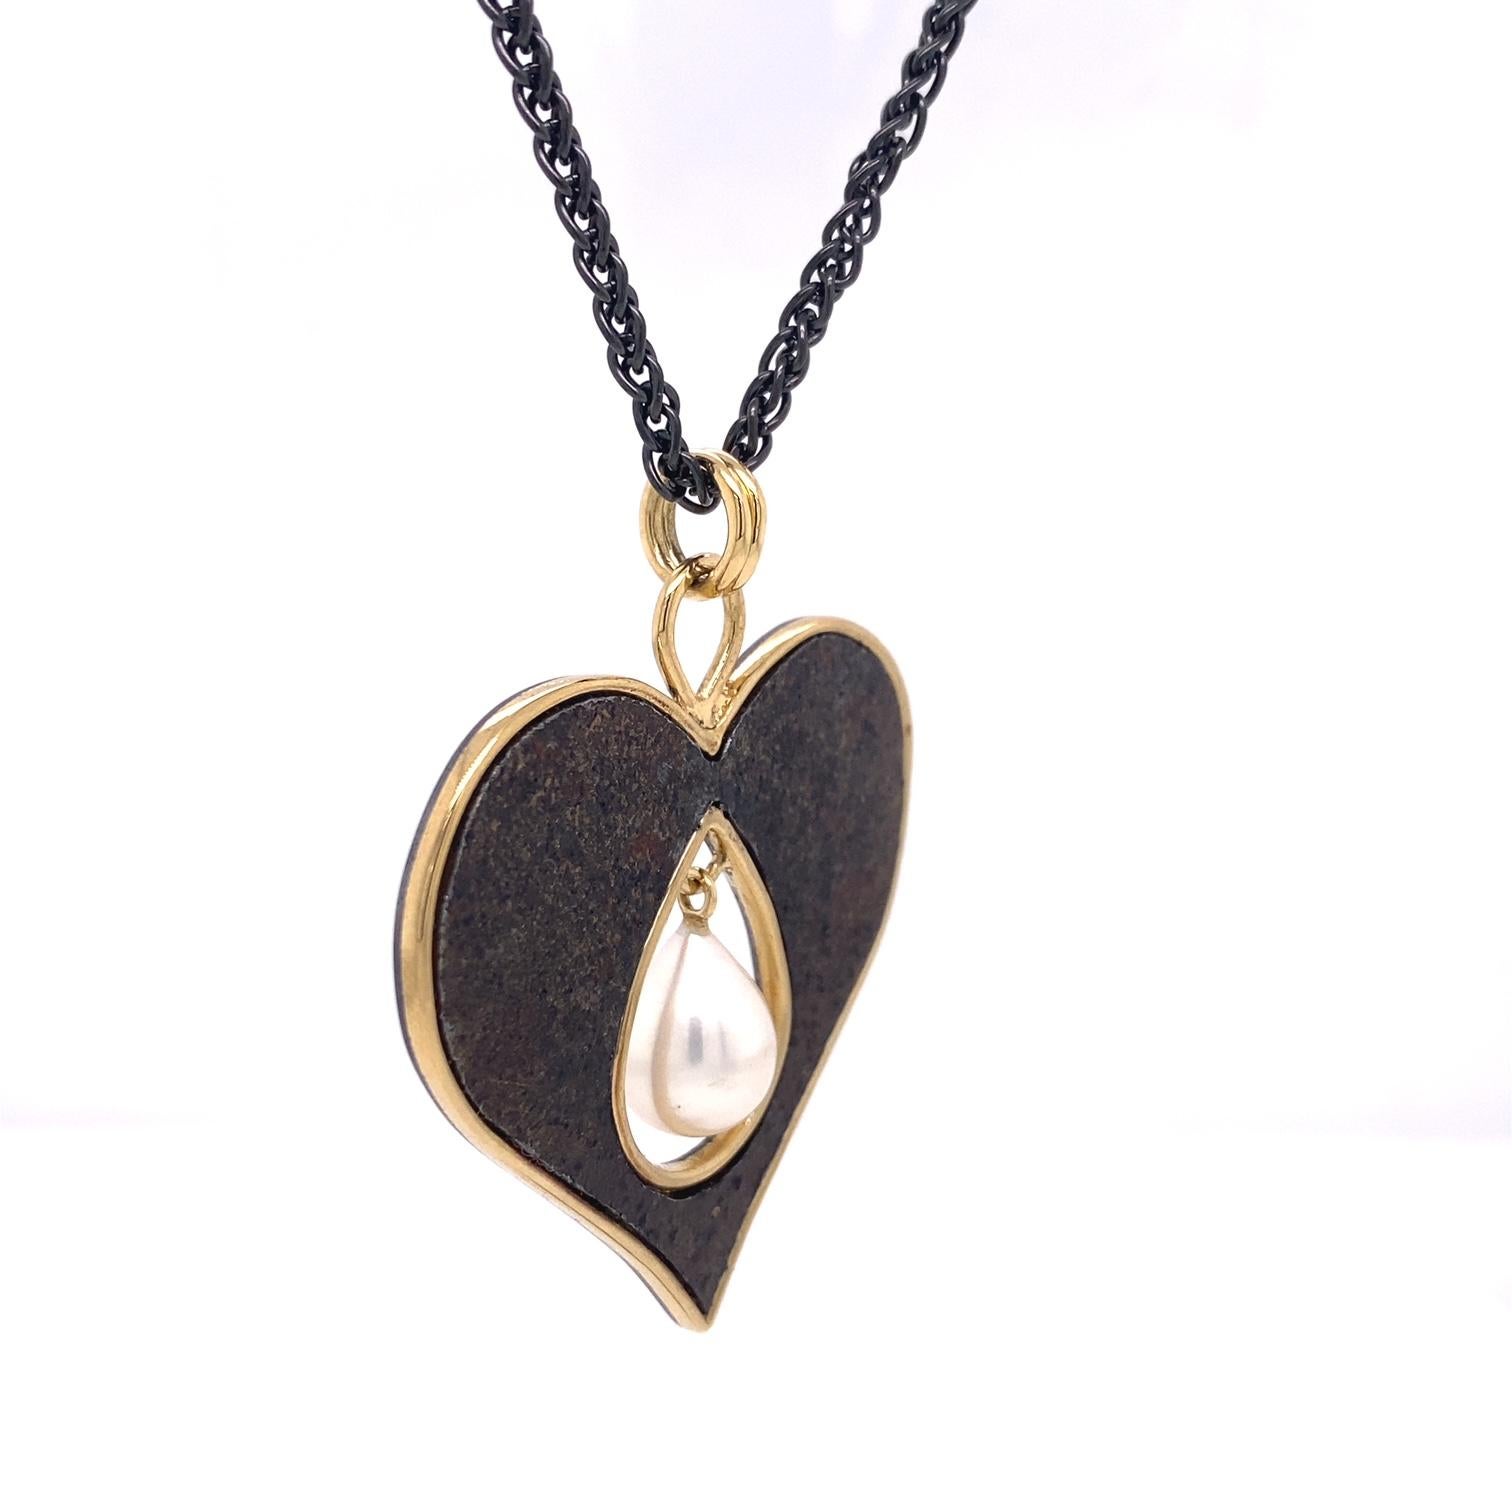 Contemporary 18 Karat, Sterling Silver, and Rusted Iron Heart Necklace with a Pearl